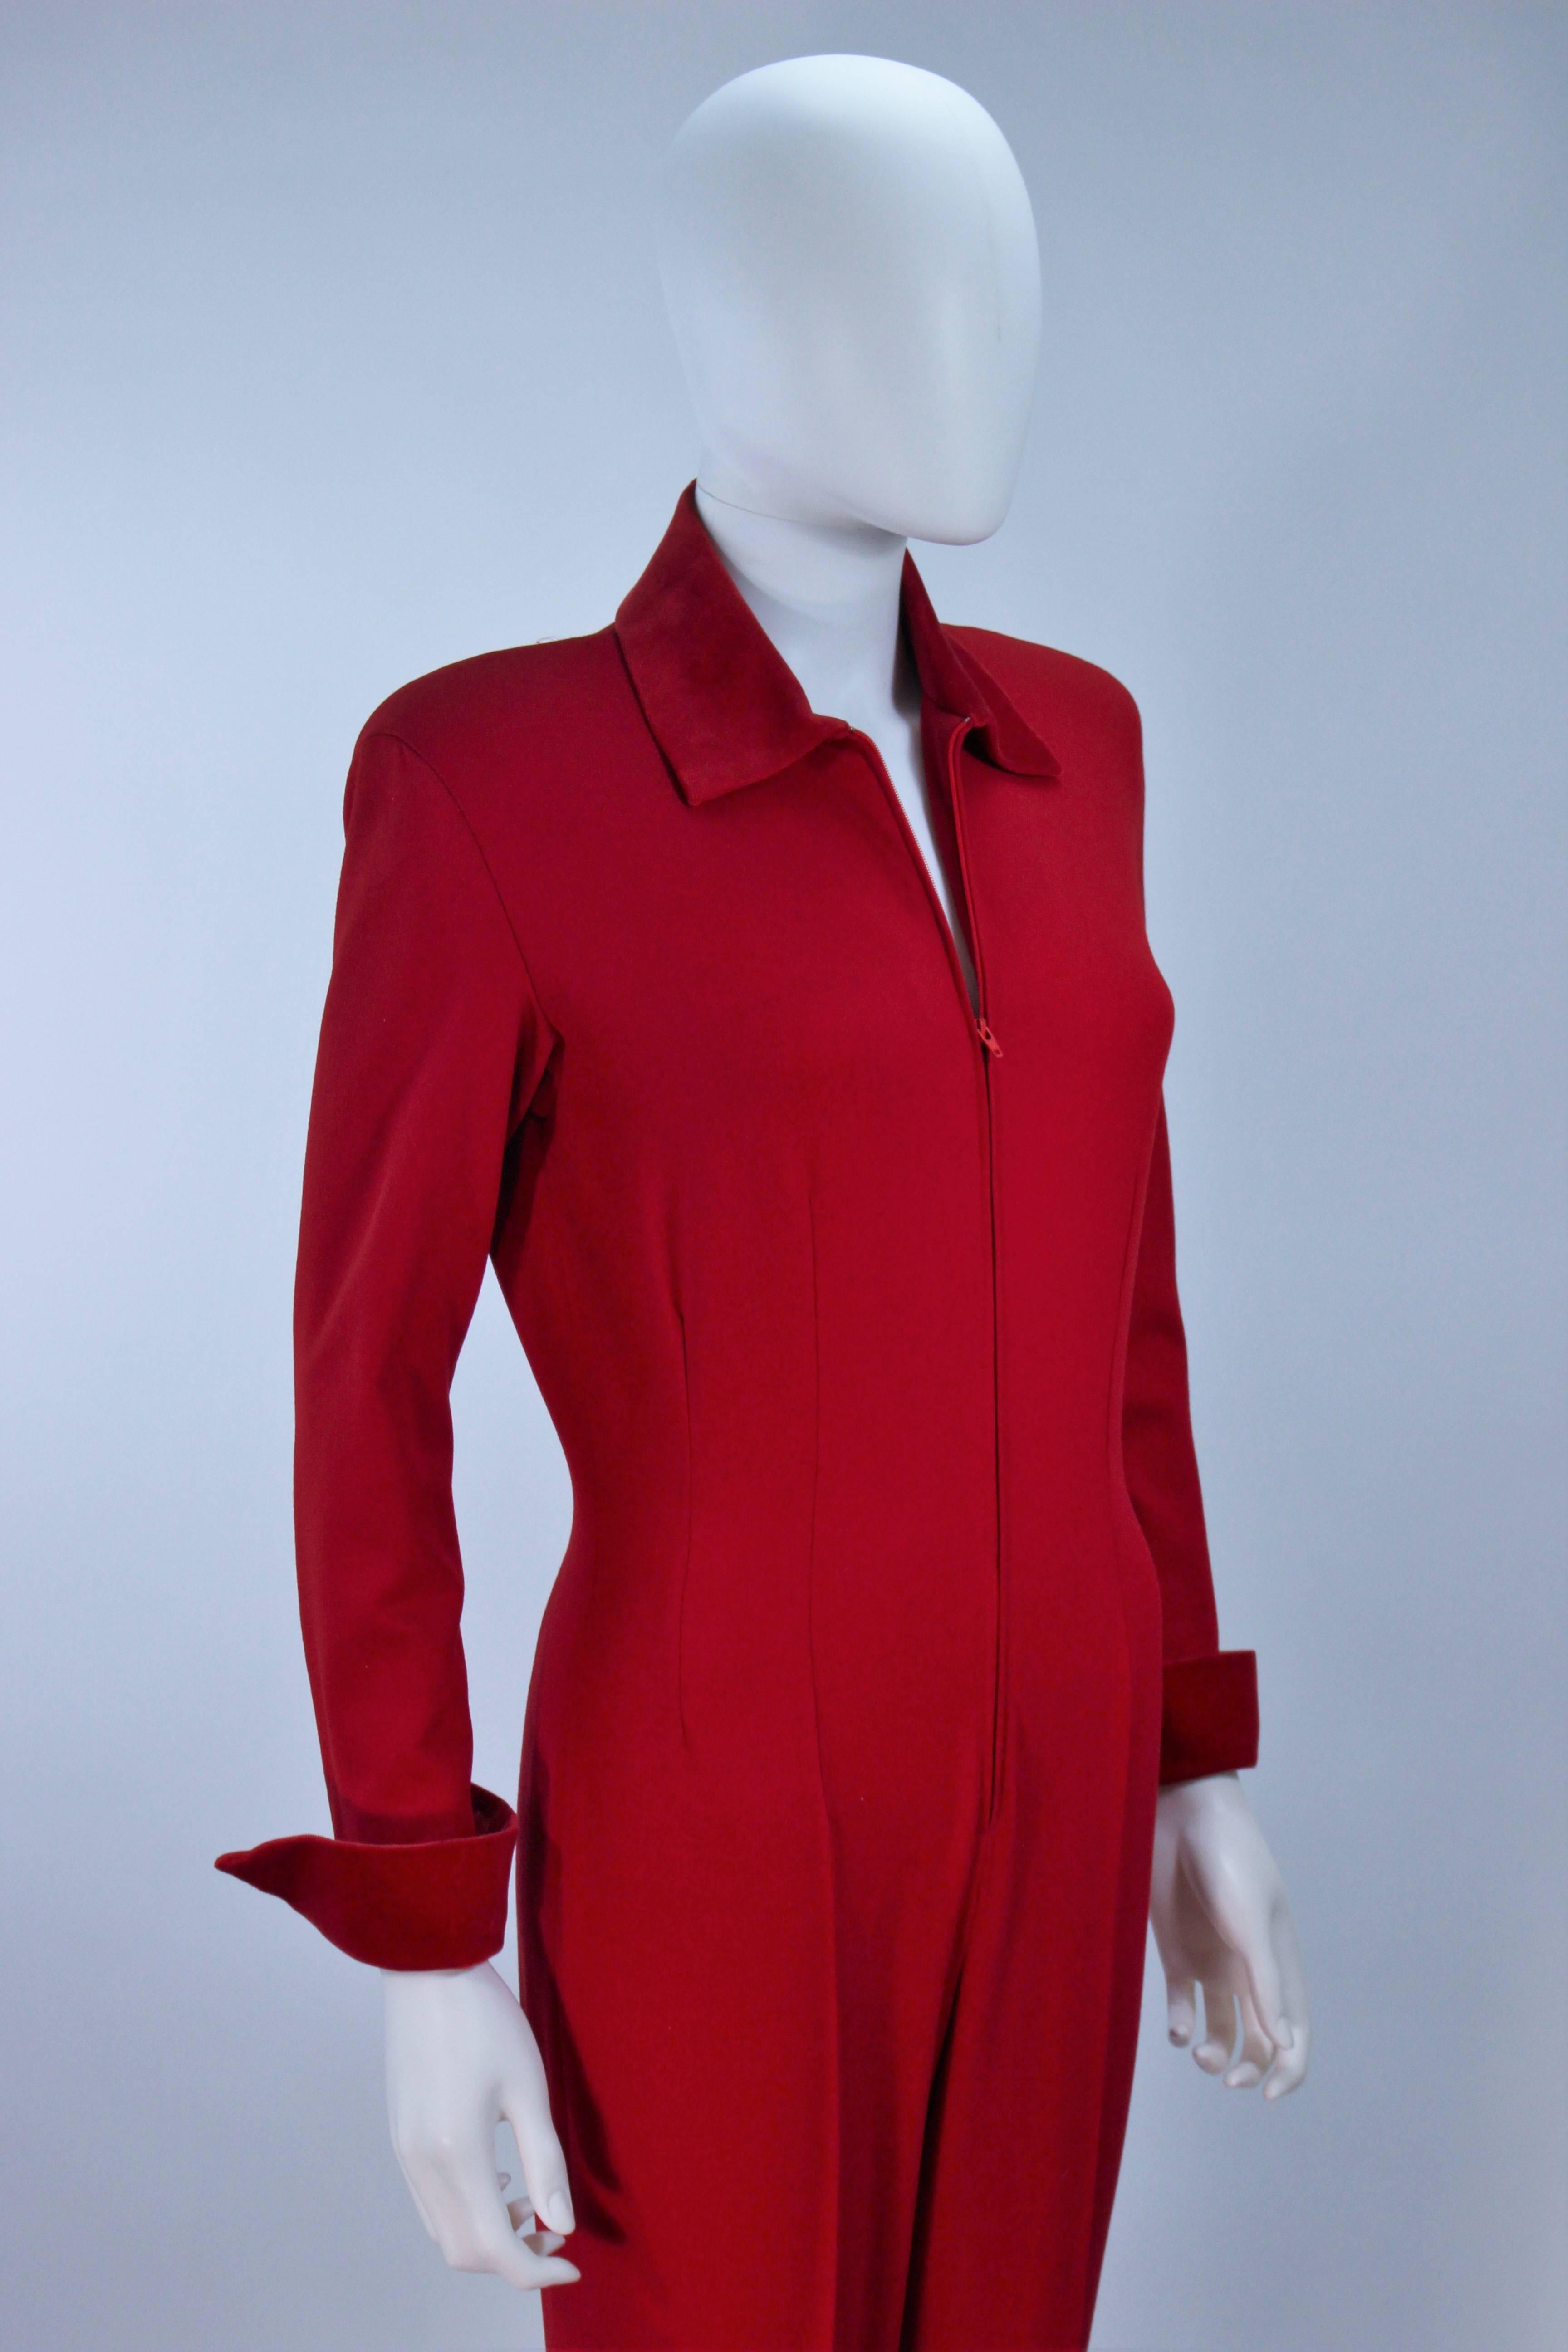 MOSCHINO Red Stretch Wool Stirrup Pantsuit with Velvet Trim Size 6-8 2